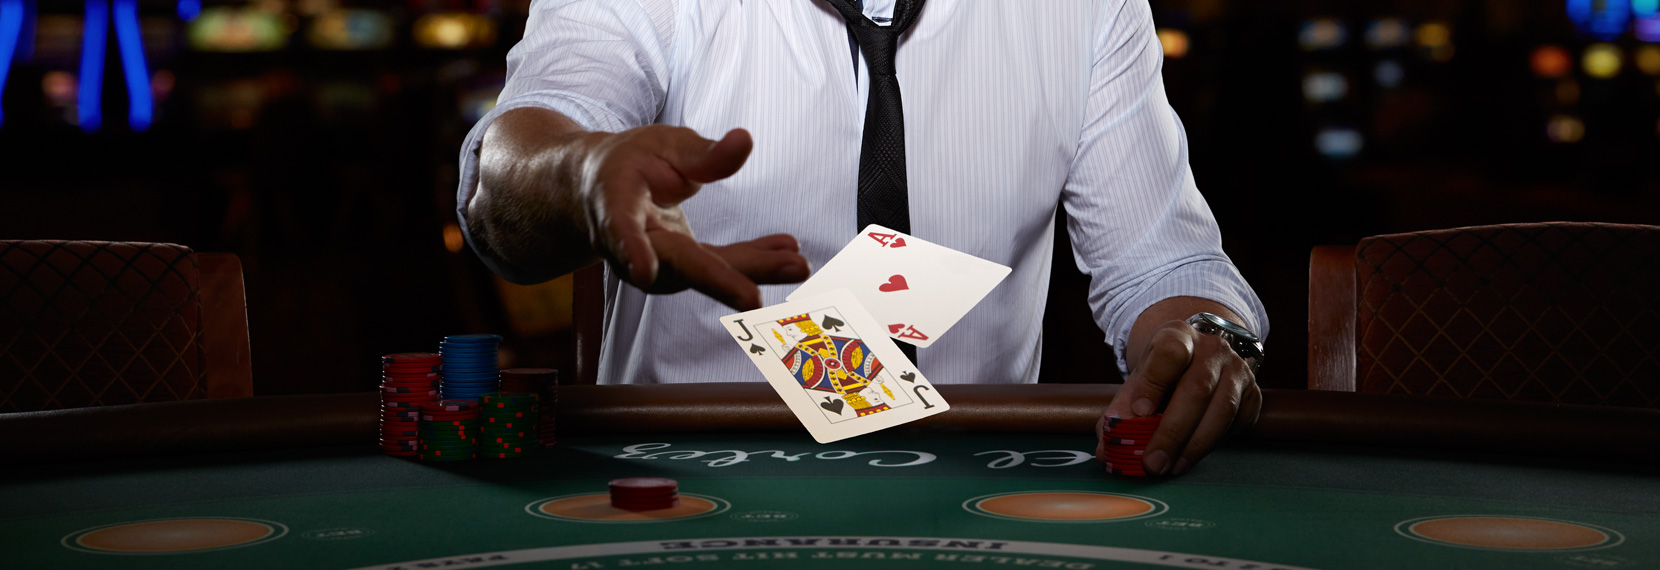 blackjack player and casino cards